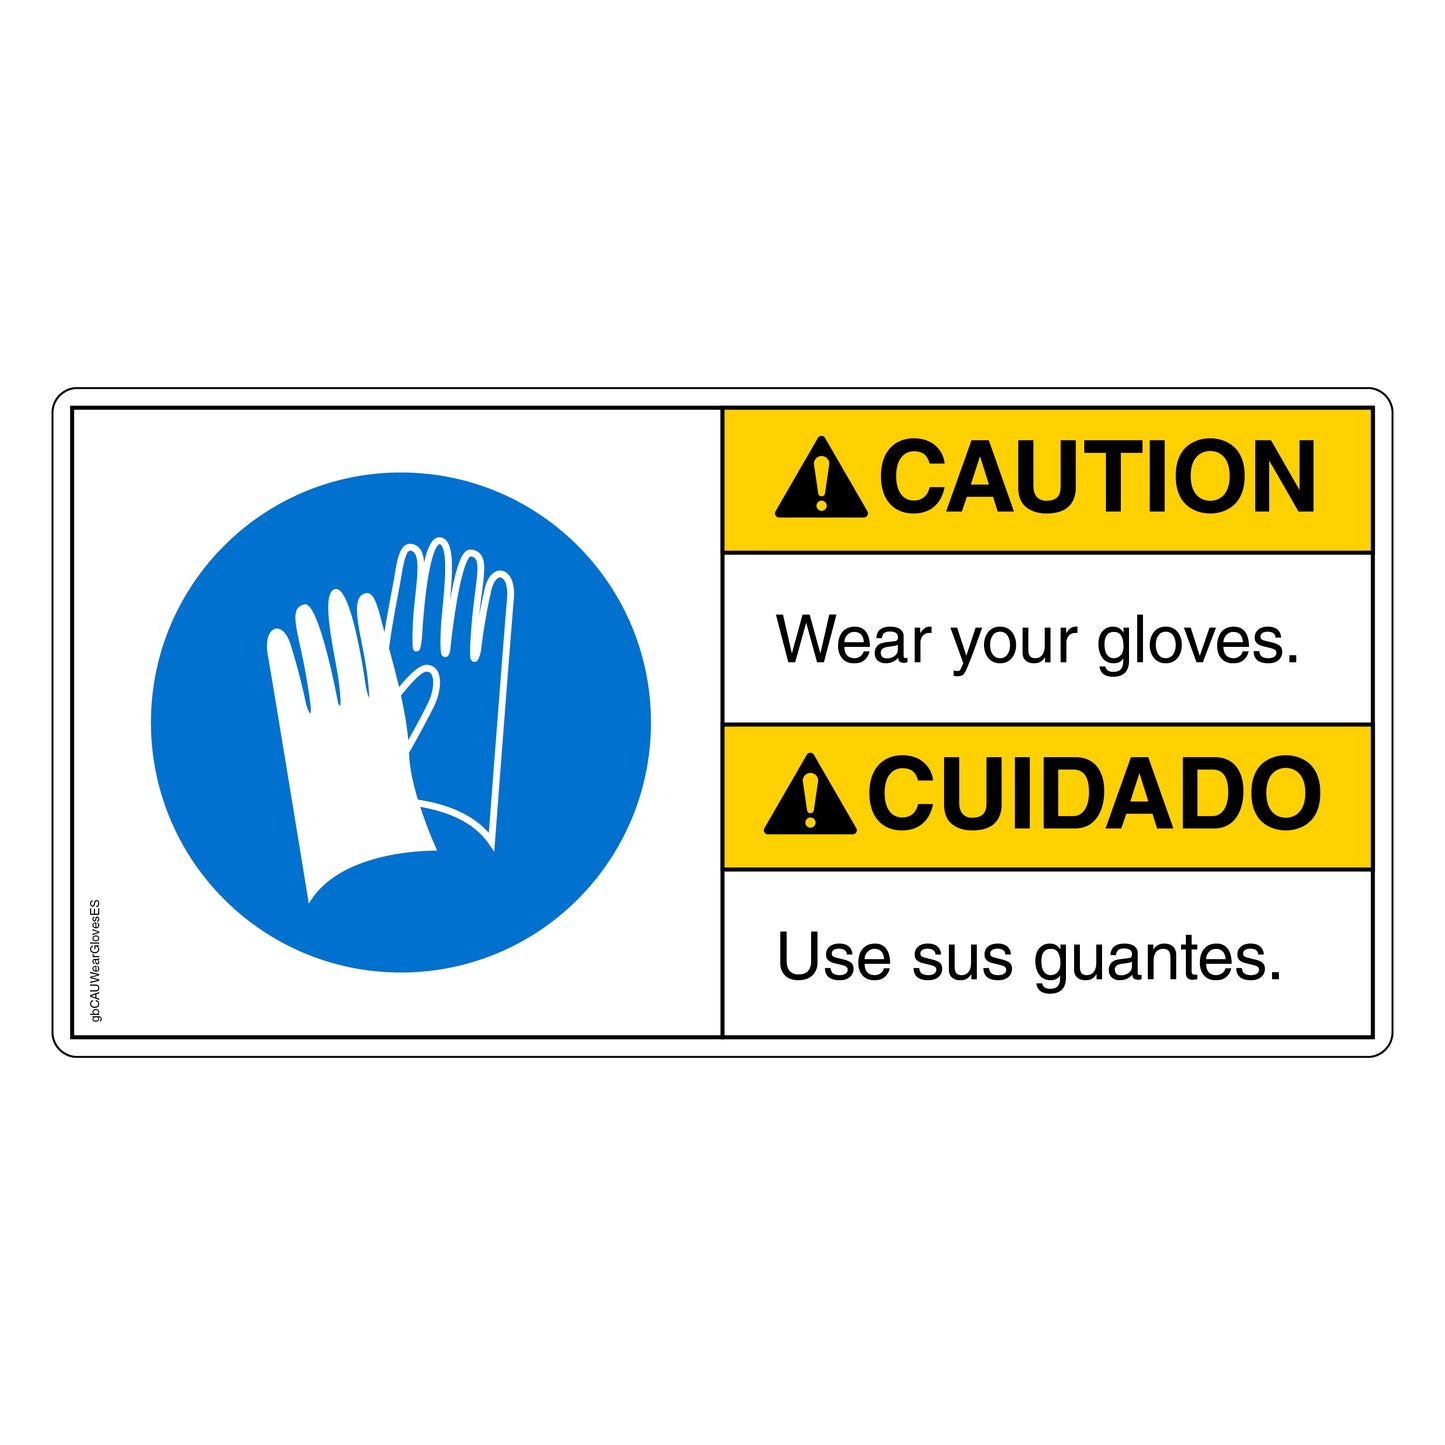 Caution Wear Your Gloves Decal in English and Spanish. 